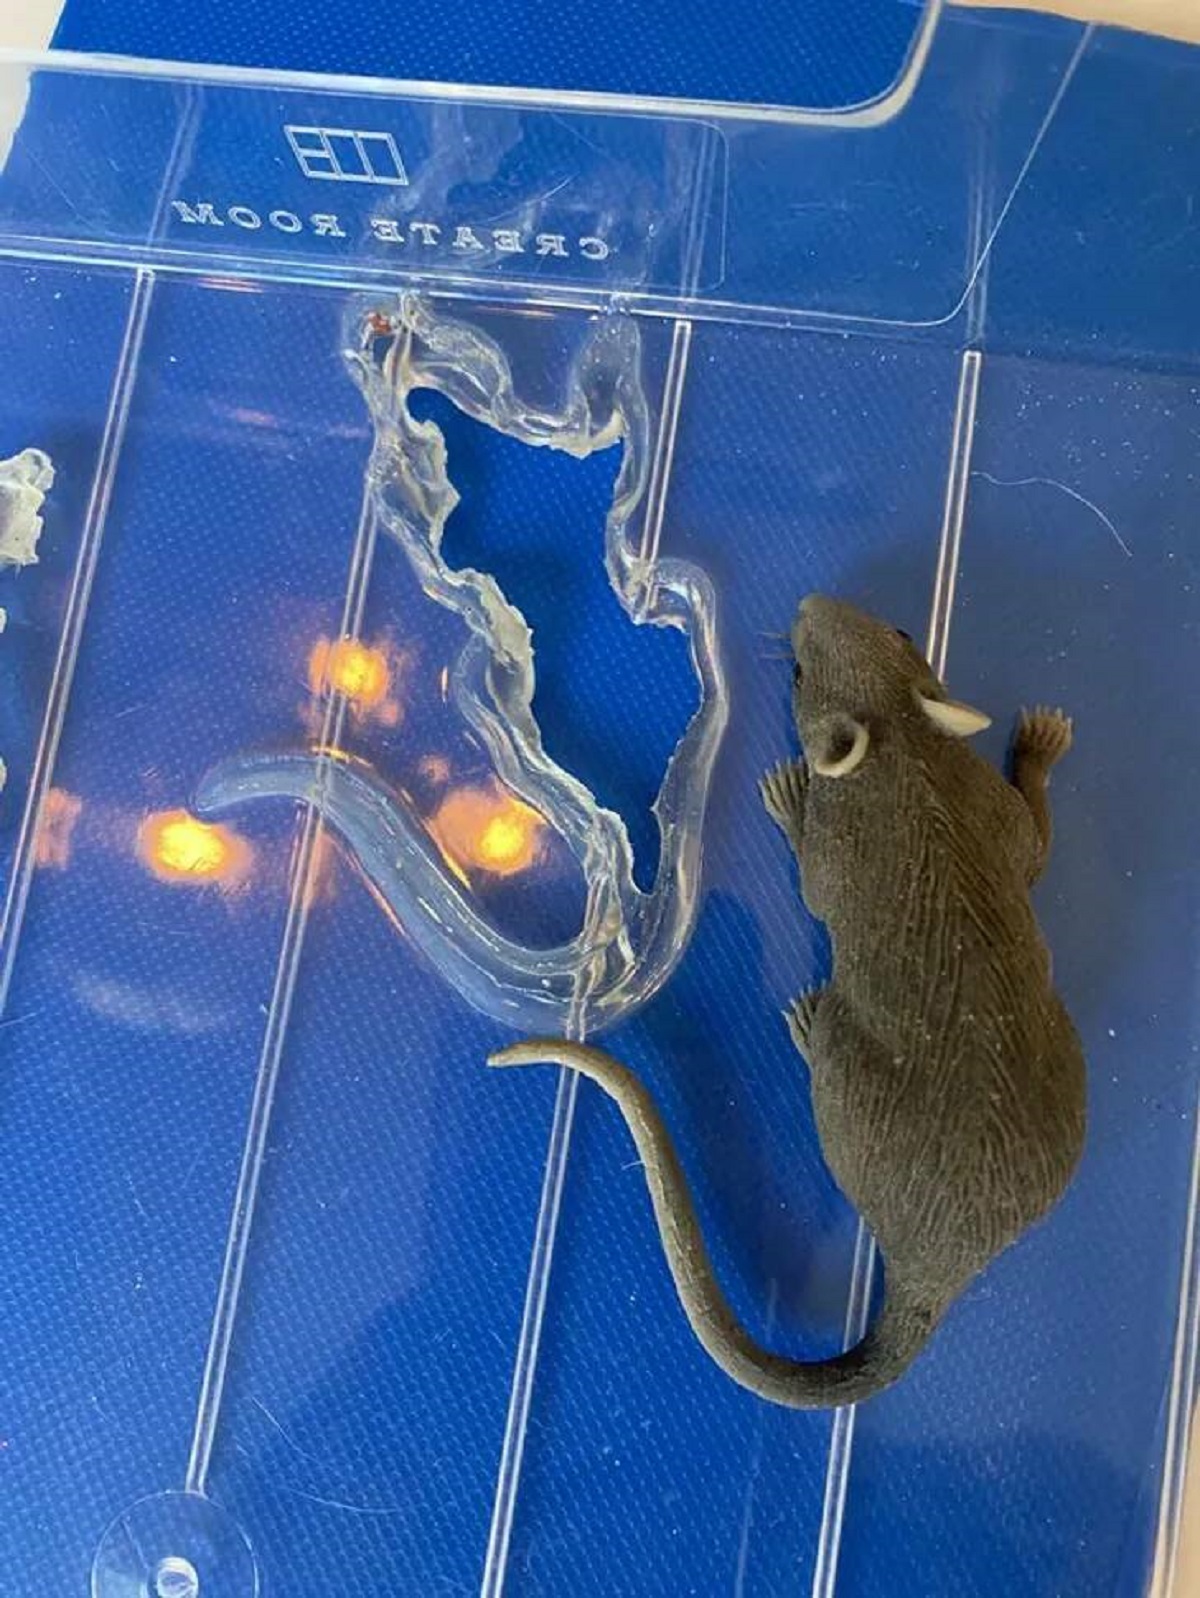 “This fake rat ‘melted’ through the plastic of this drawer.”